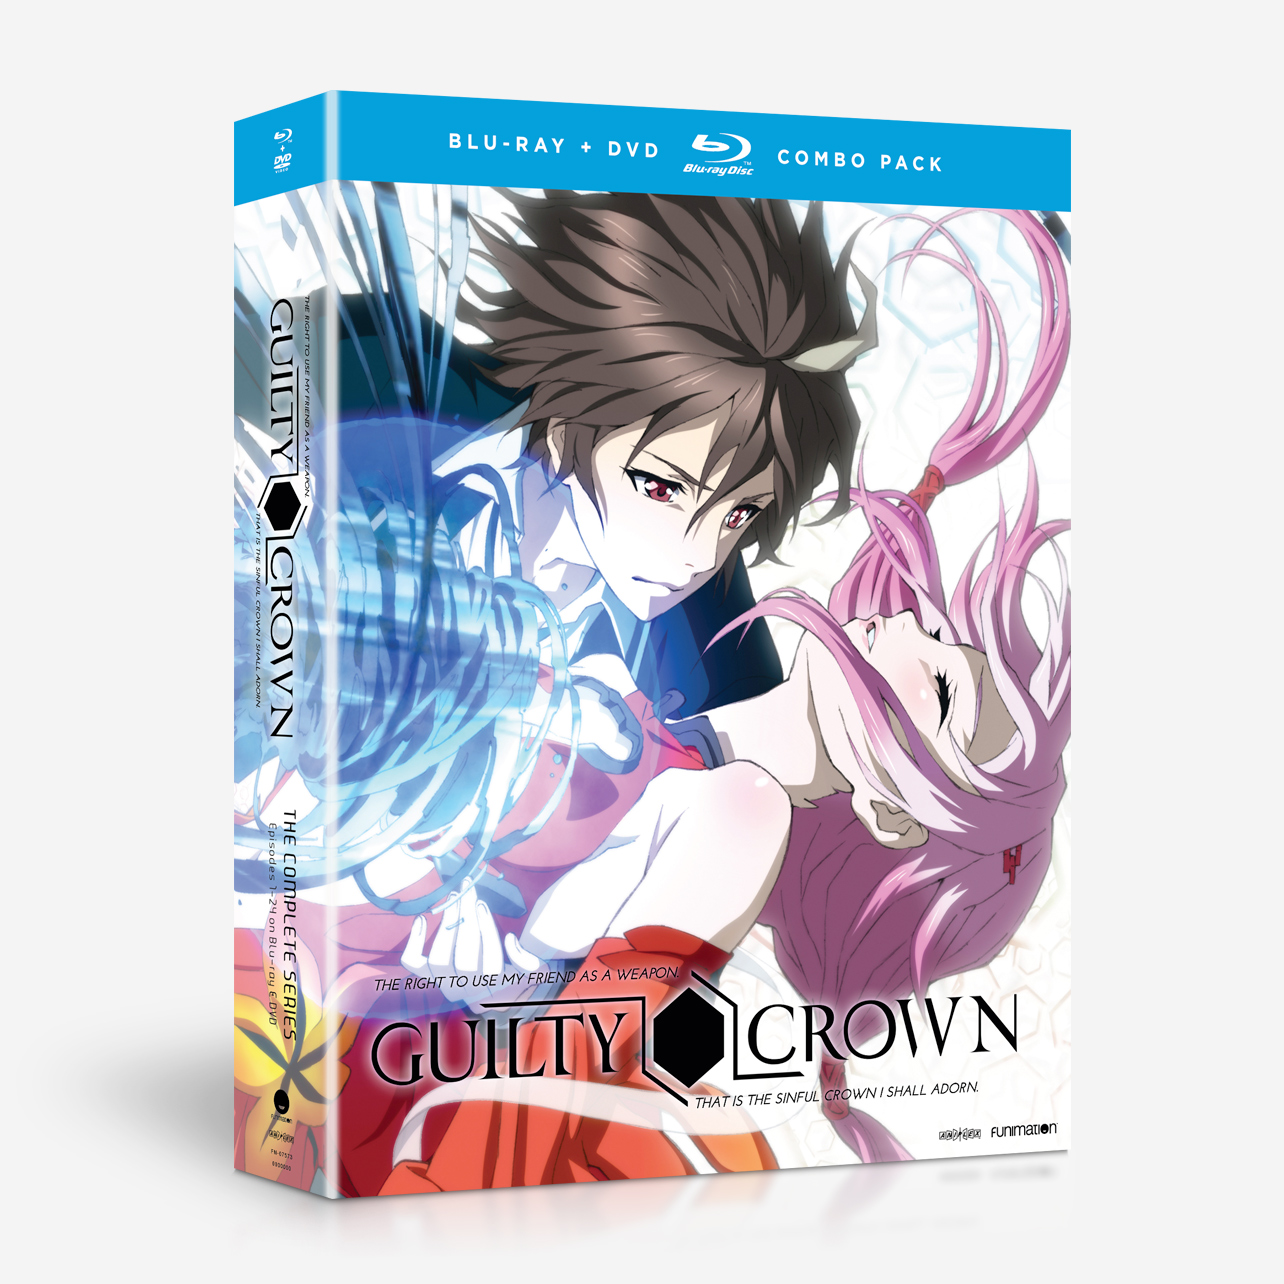 Guilty Crown - The Complete Series - Blu-ray + DVD image count 0